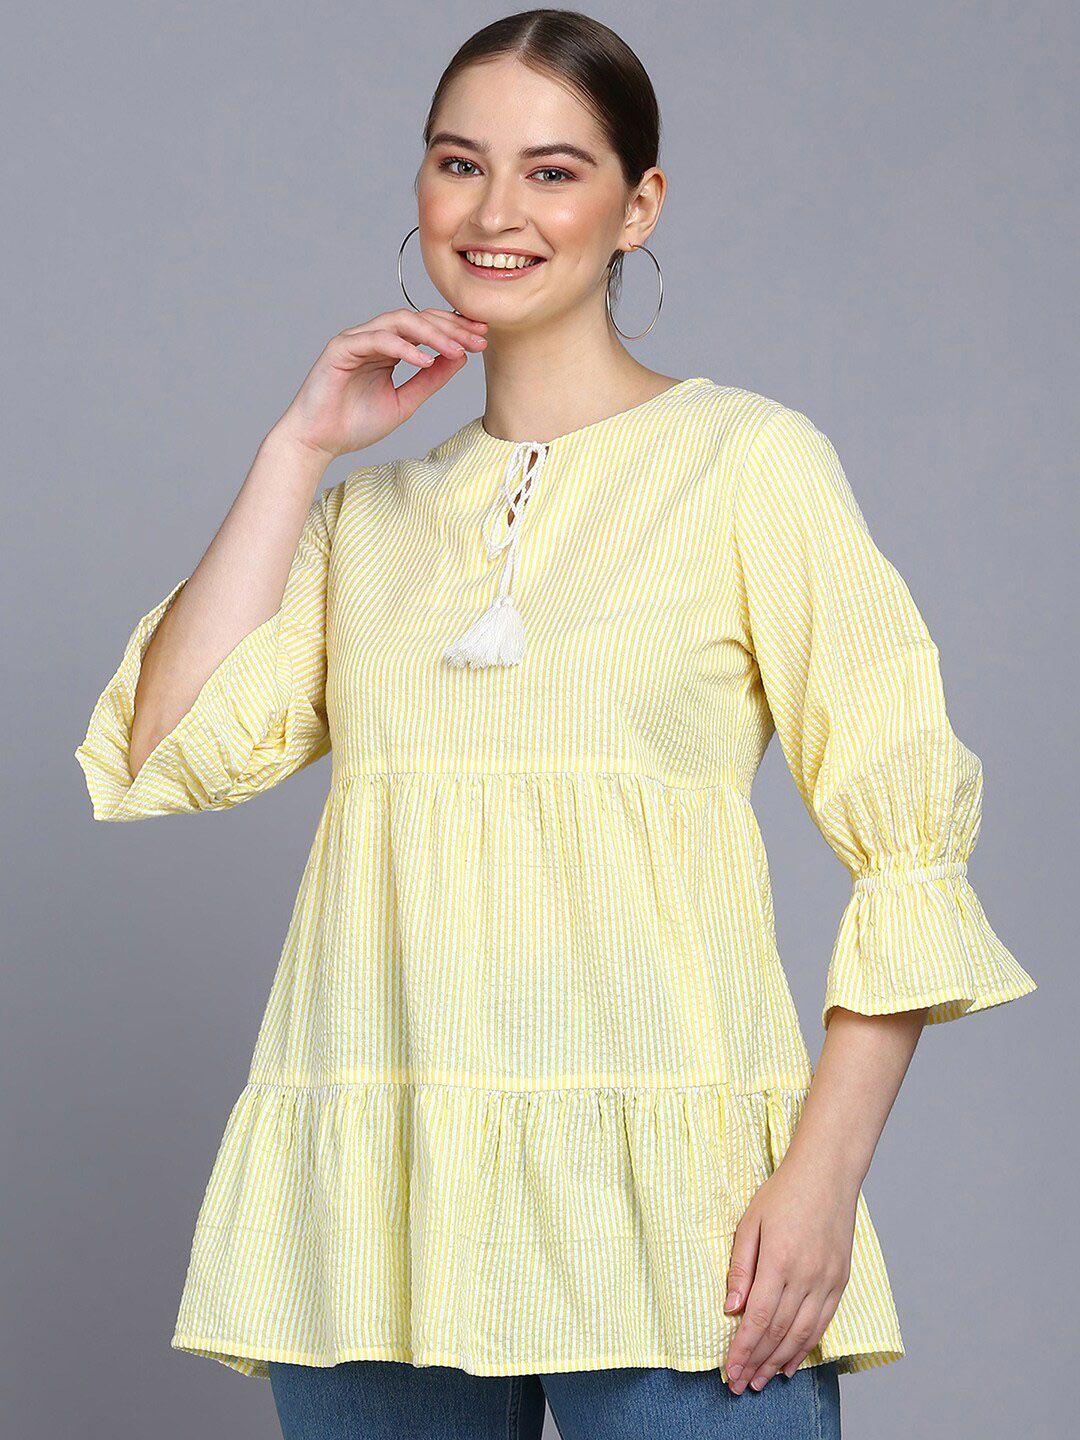 mast & harbour yellow & white vertical striped tie-up neck pure cotton a-line top